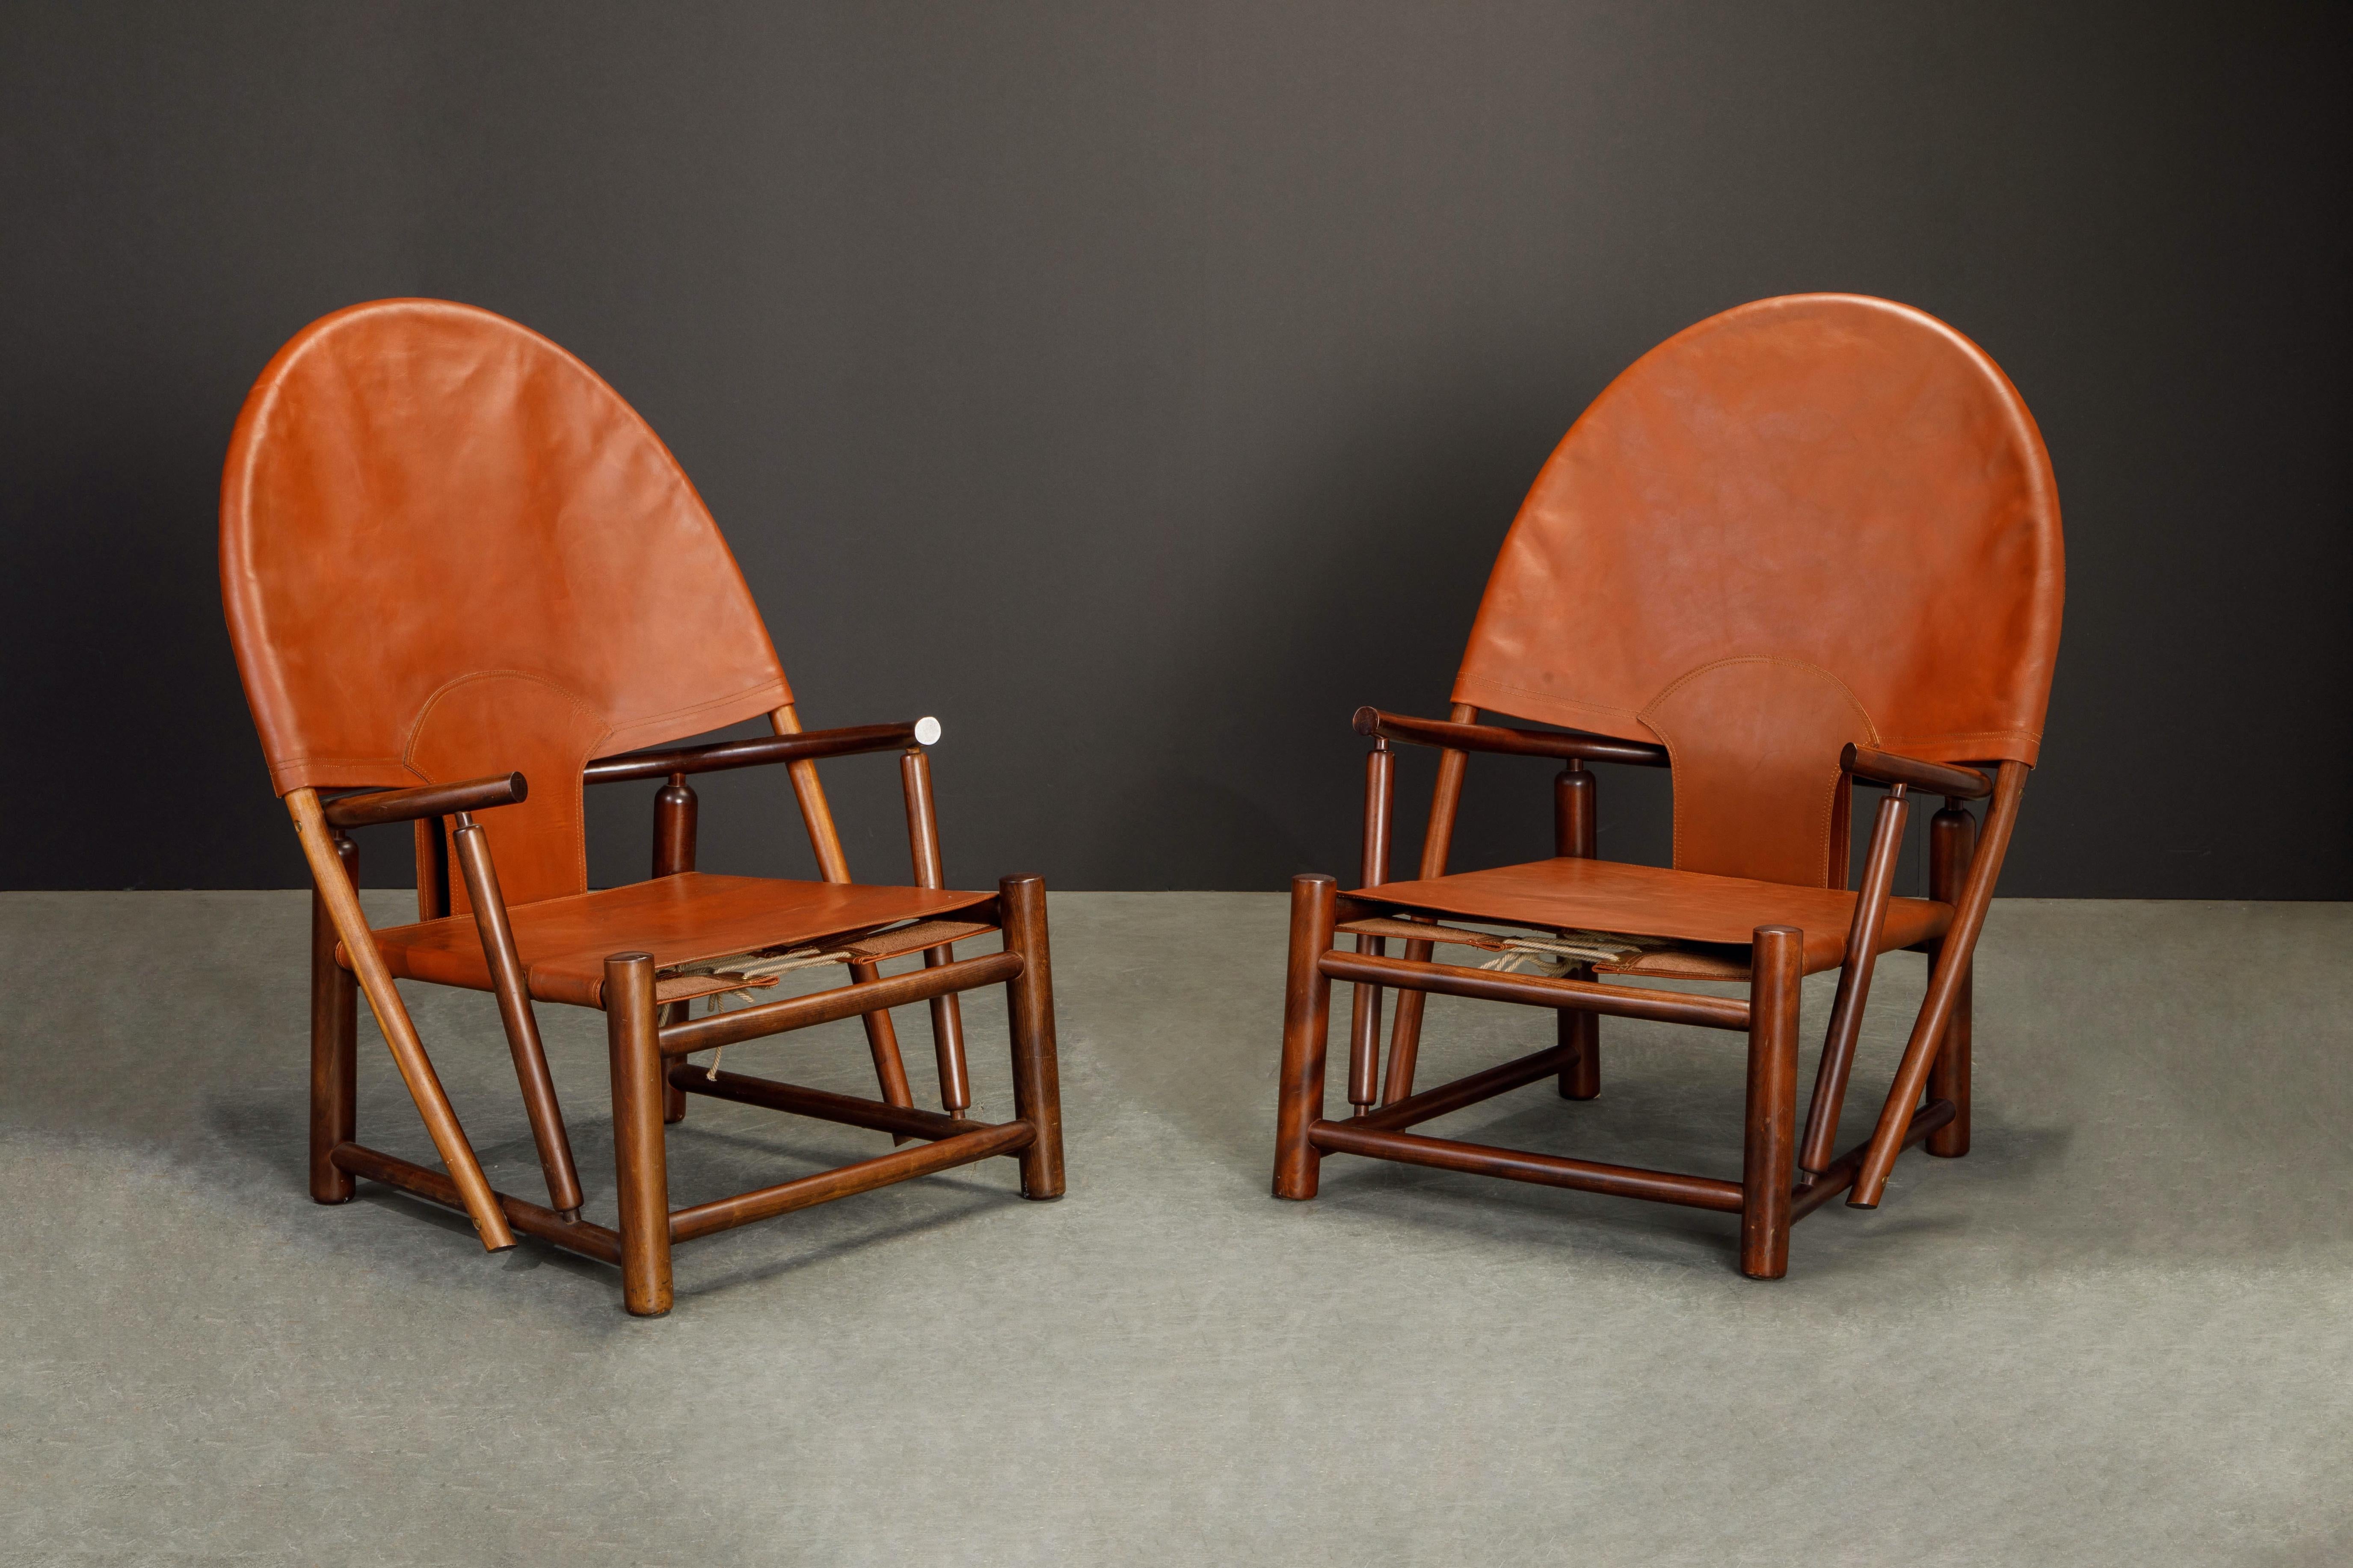 Italian 'Hoop' Lounge Chairs by Piero Palange & Werther Toffoloni for Germa, c. 1970